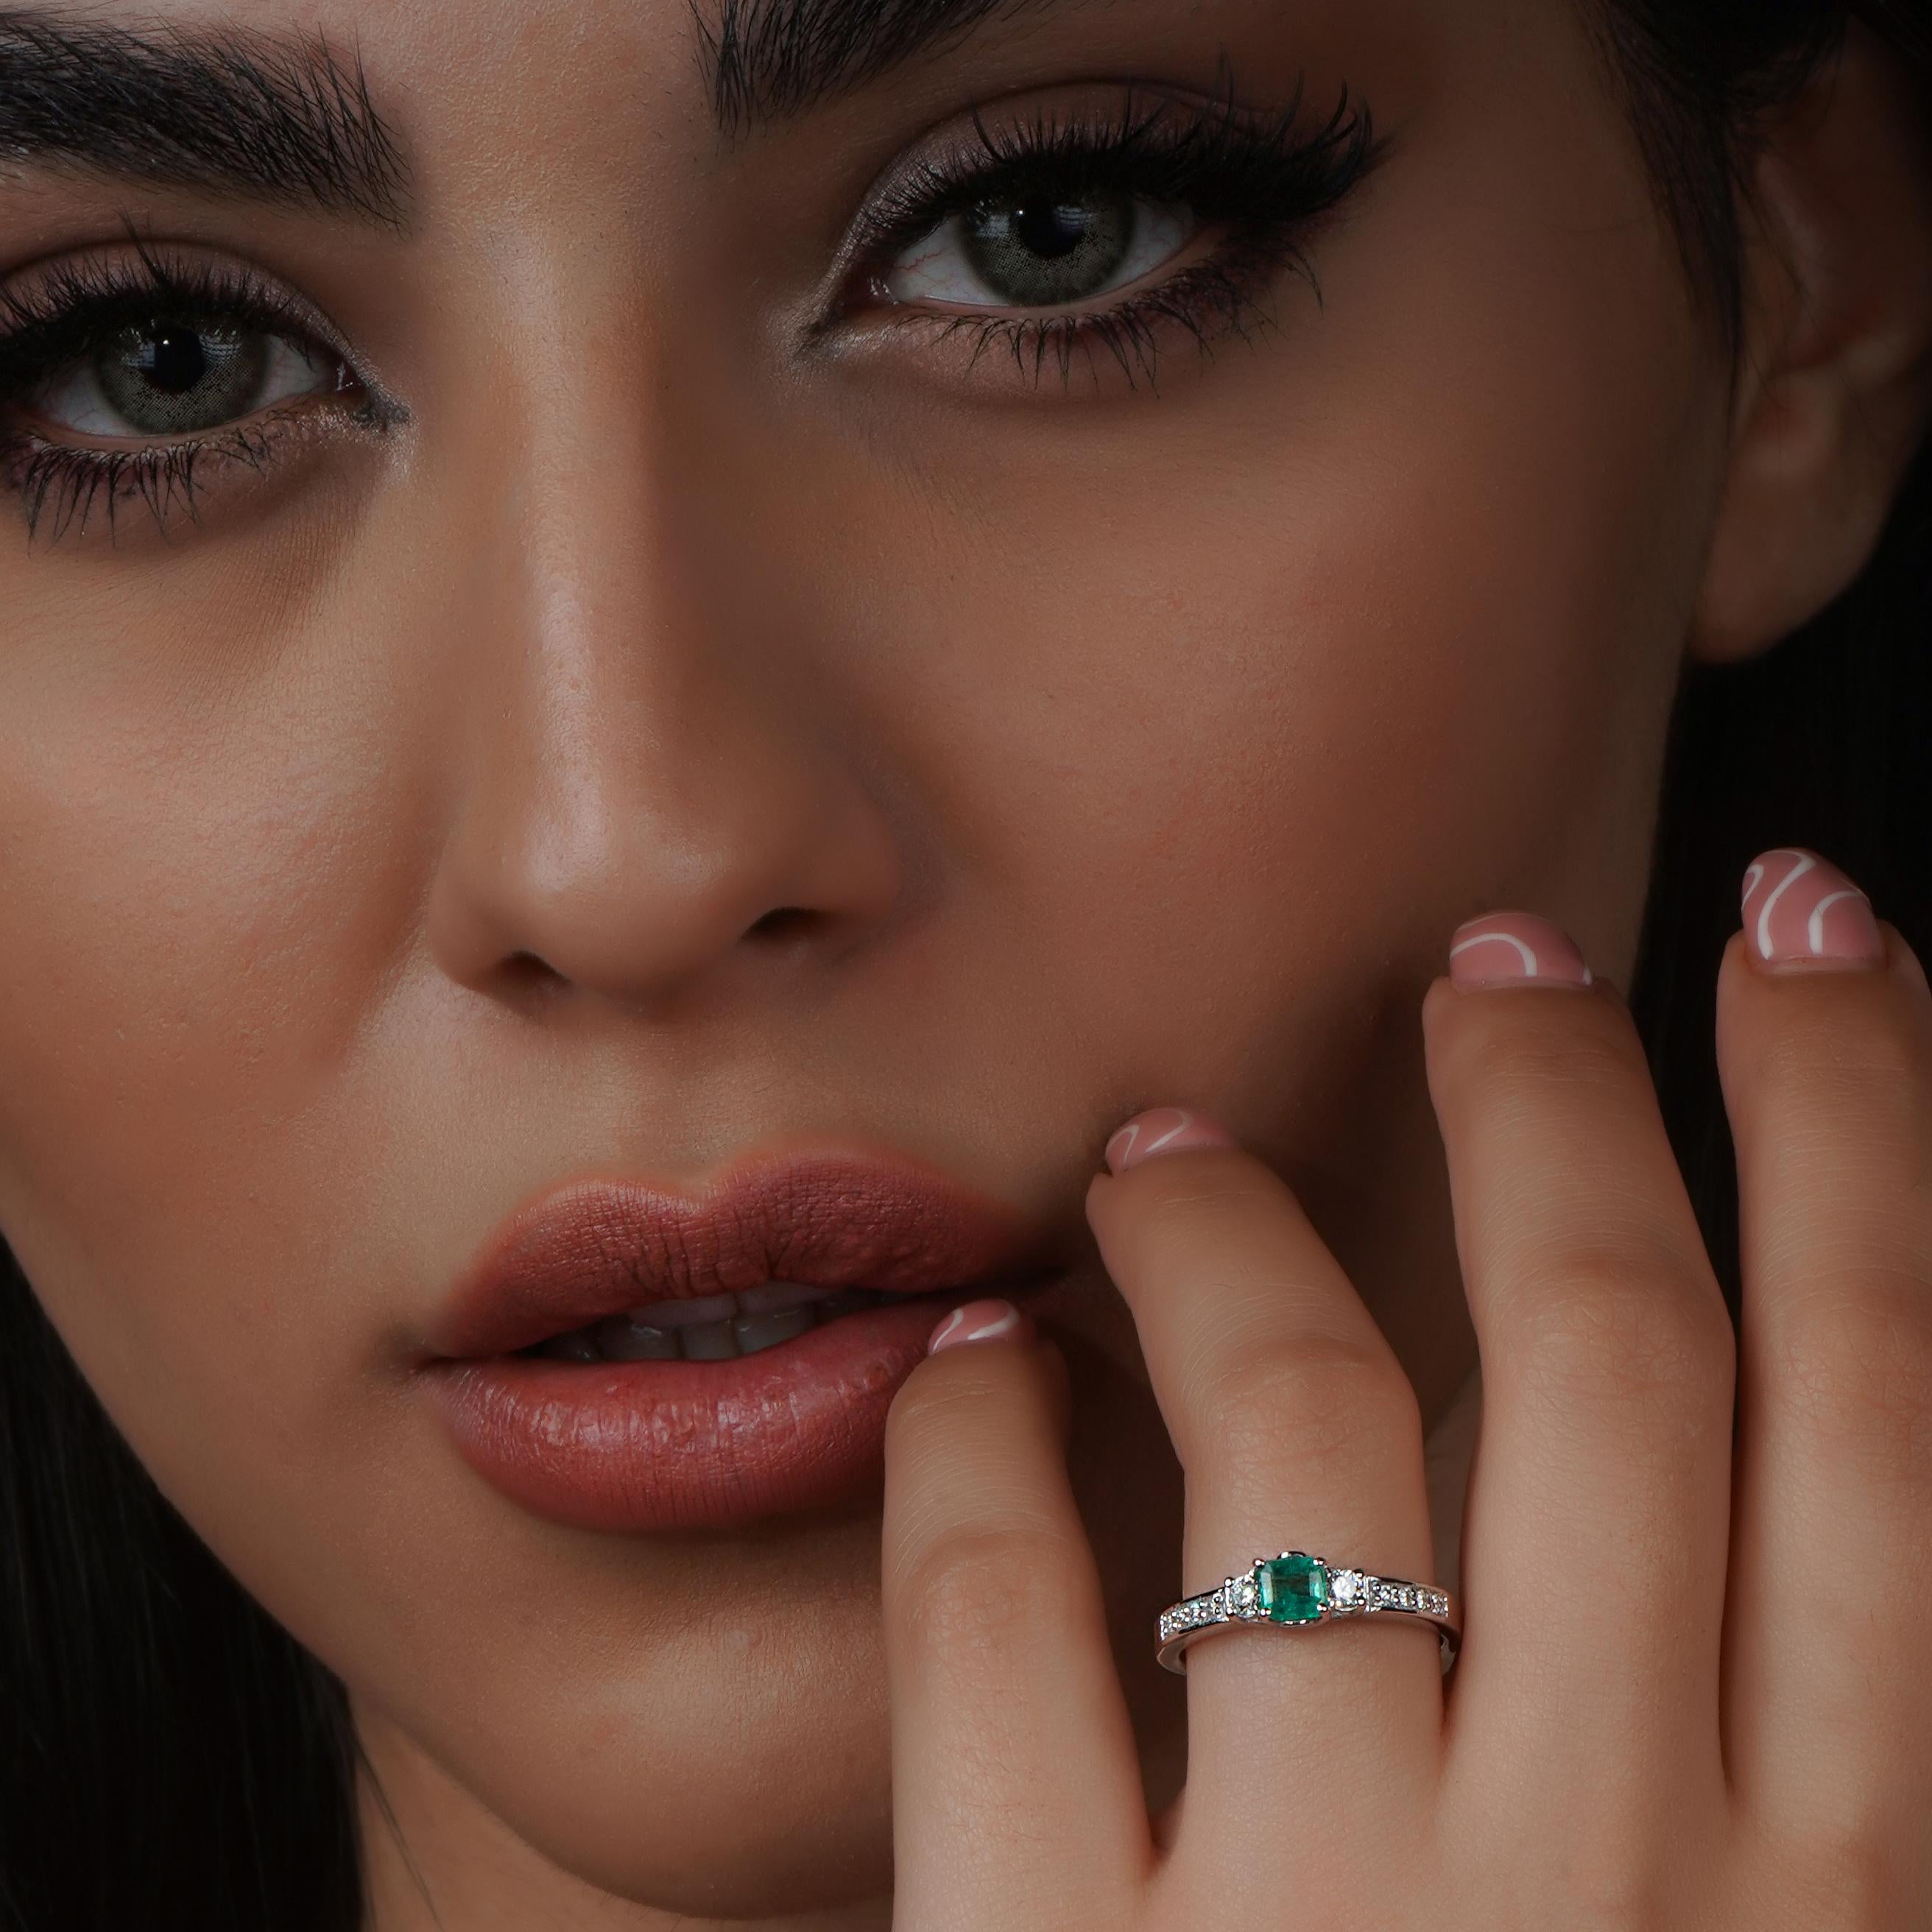 Are you looking for a gift that will make your loved one feel special? Do you want to treat yourself to a piece of jewelry that will make you shine? If so, look no further than our exquisite emerald ring!

Our exquisite emerald ring is a stunning